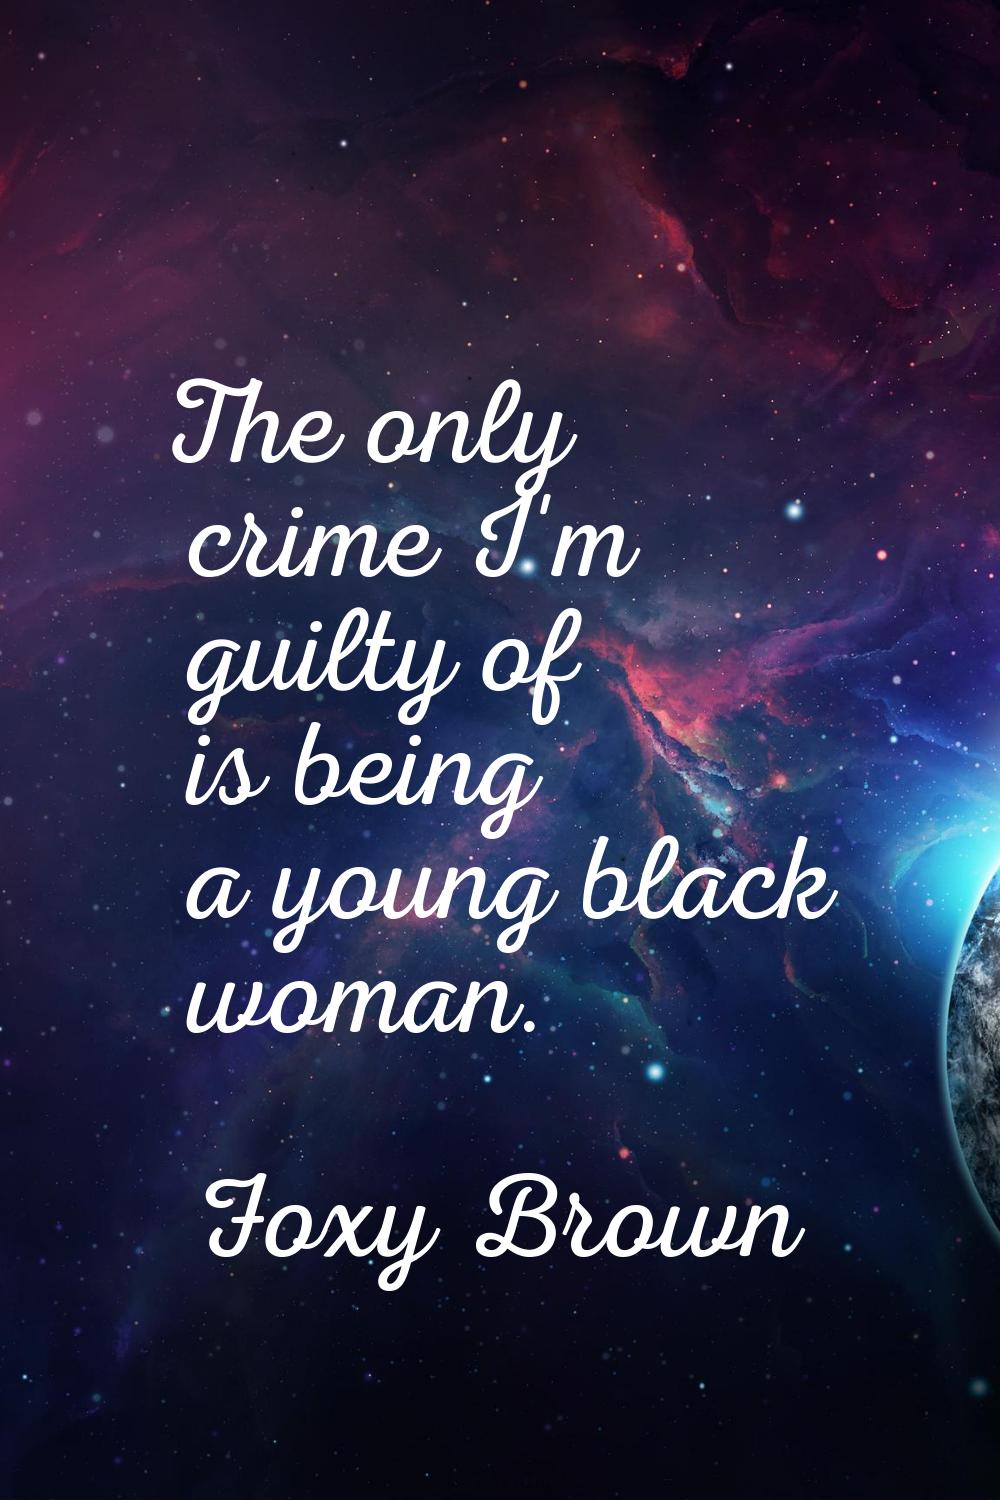 The only crime I'm guilty of is being a young black woman.